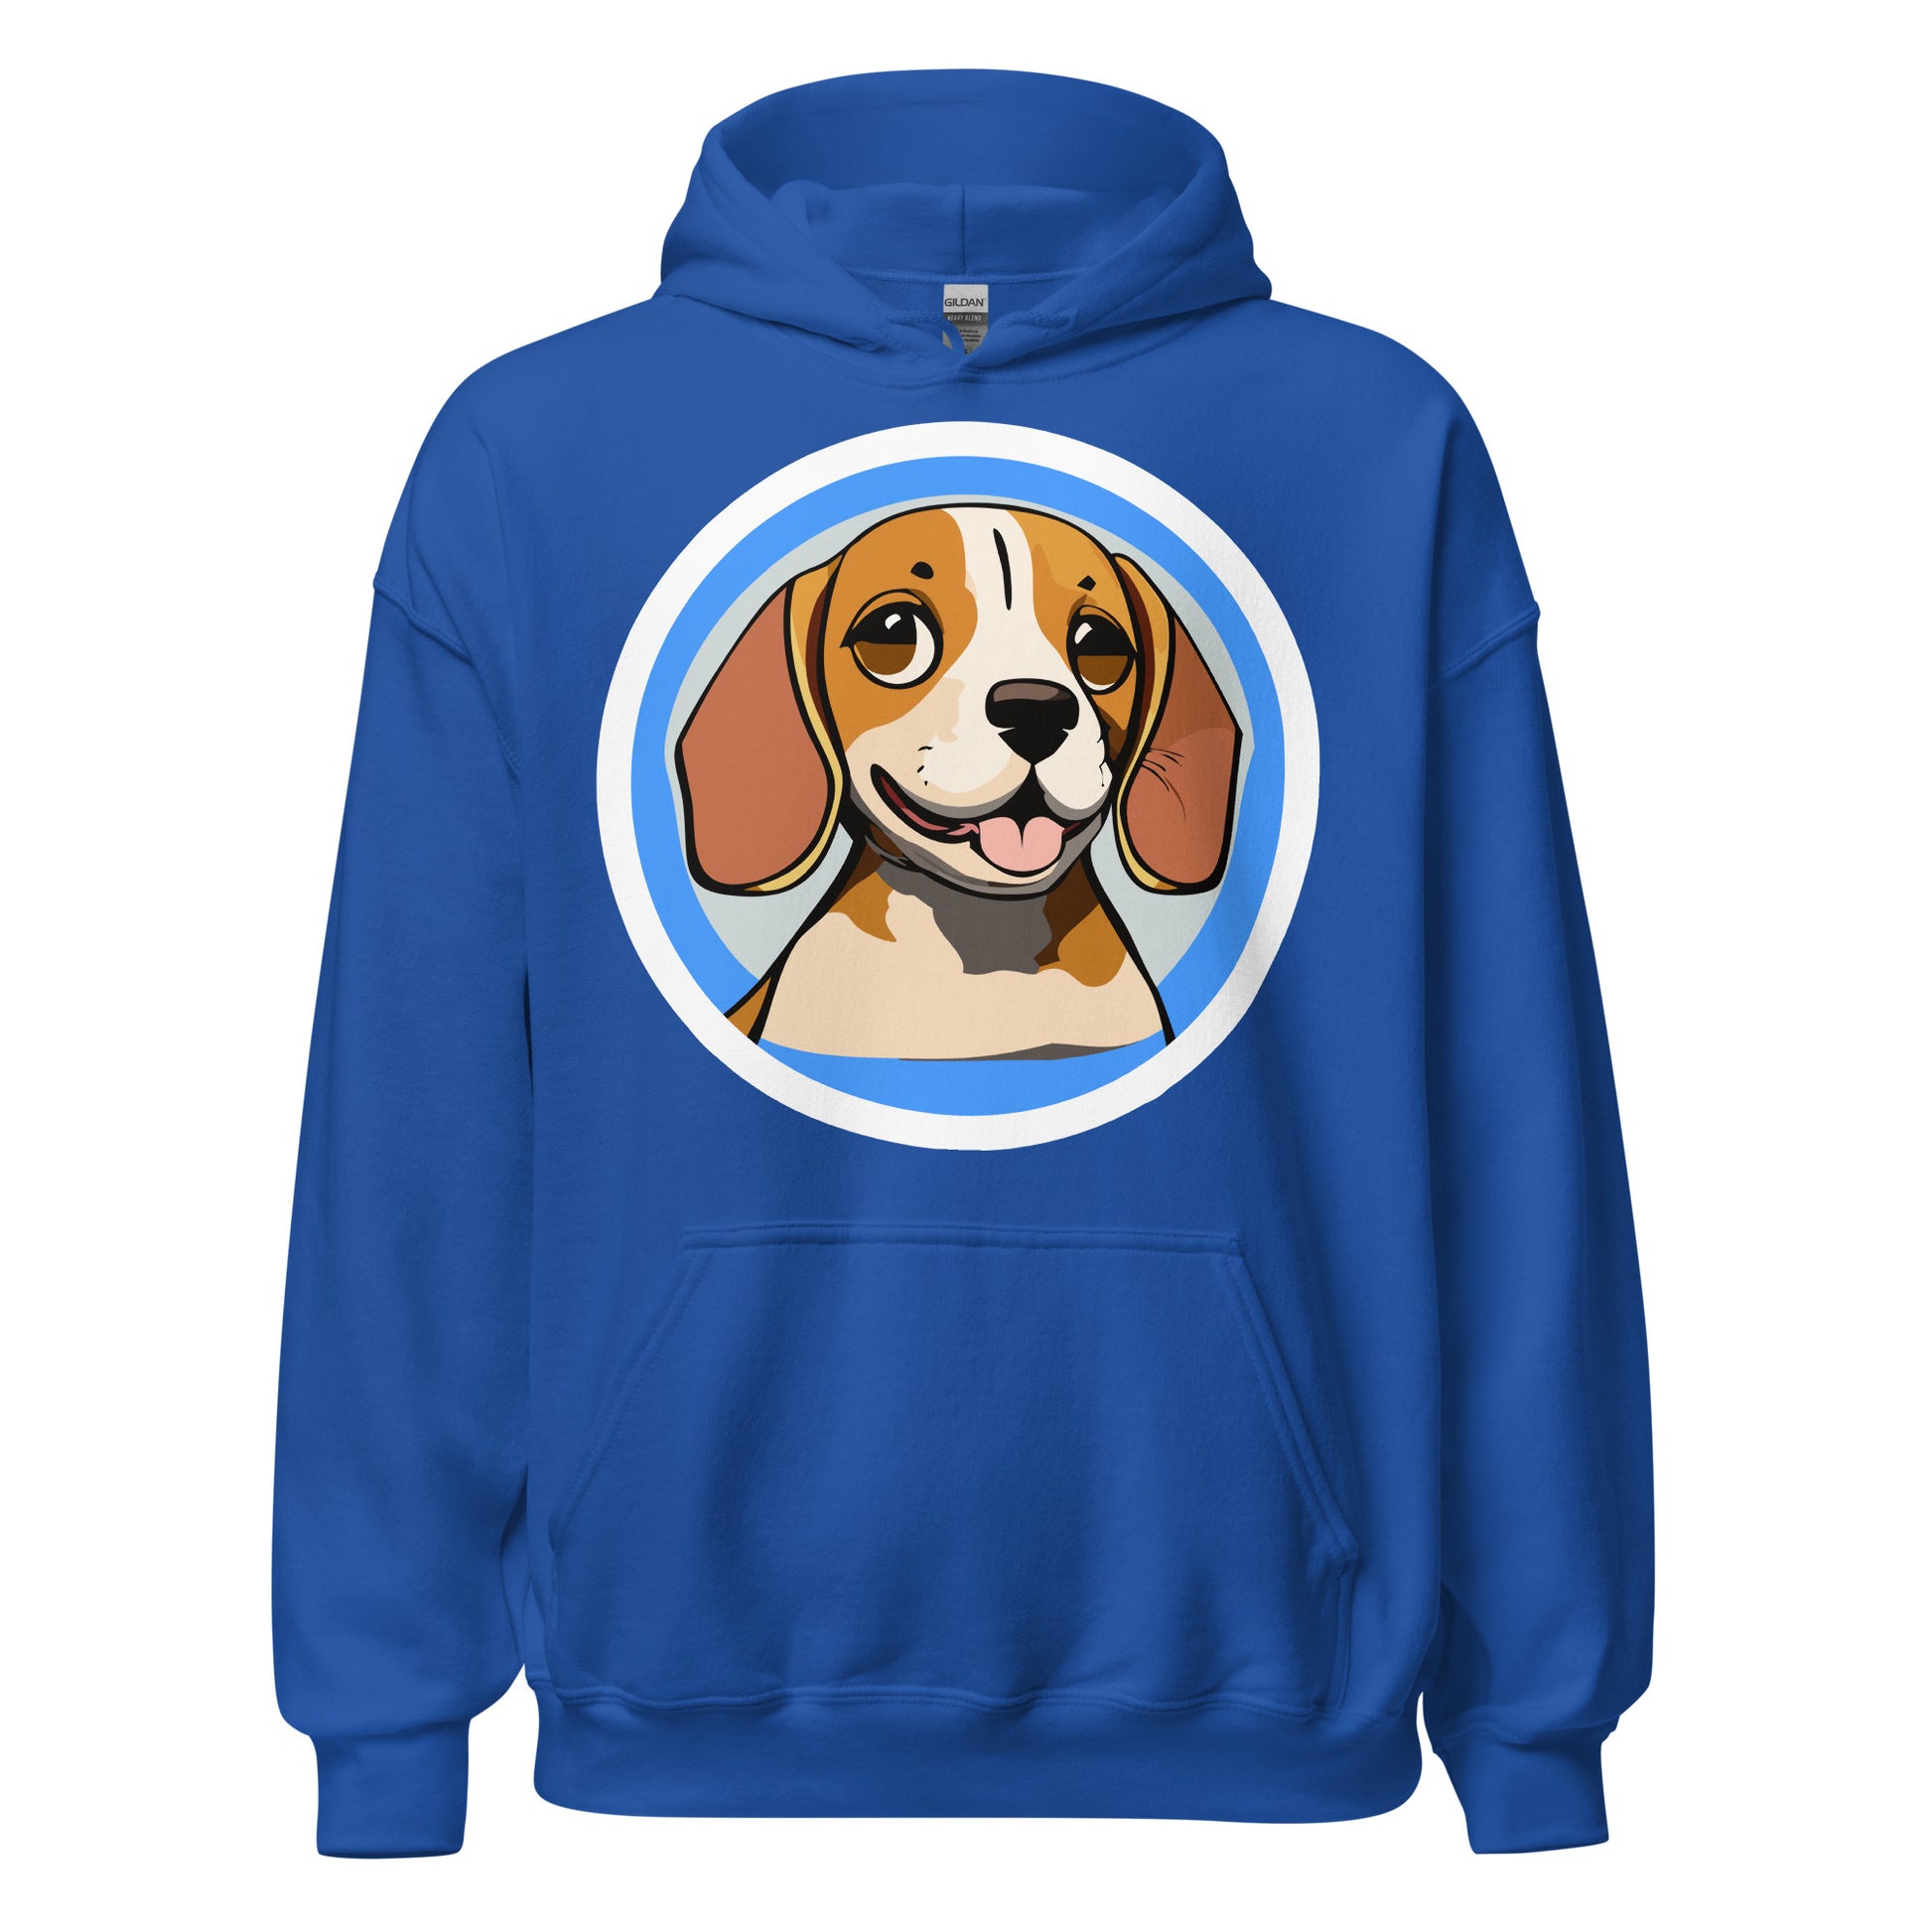 Comfy unisex hoodie for him or her with a cute beagle image, in royal blue